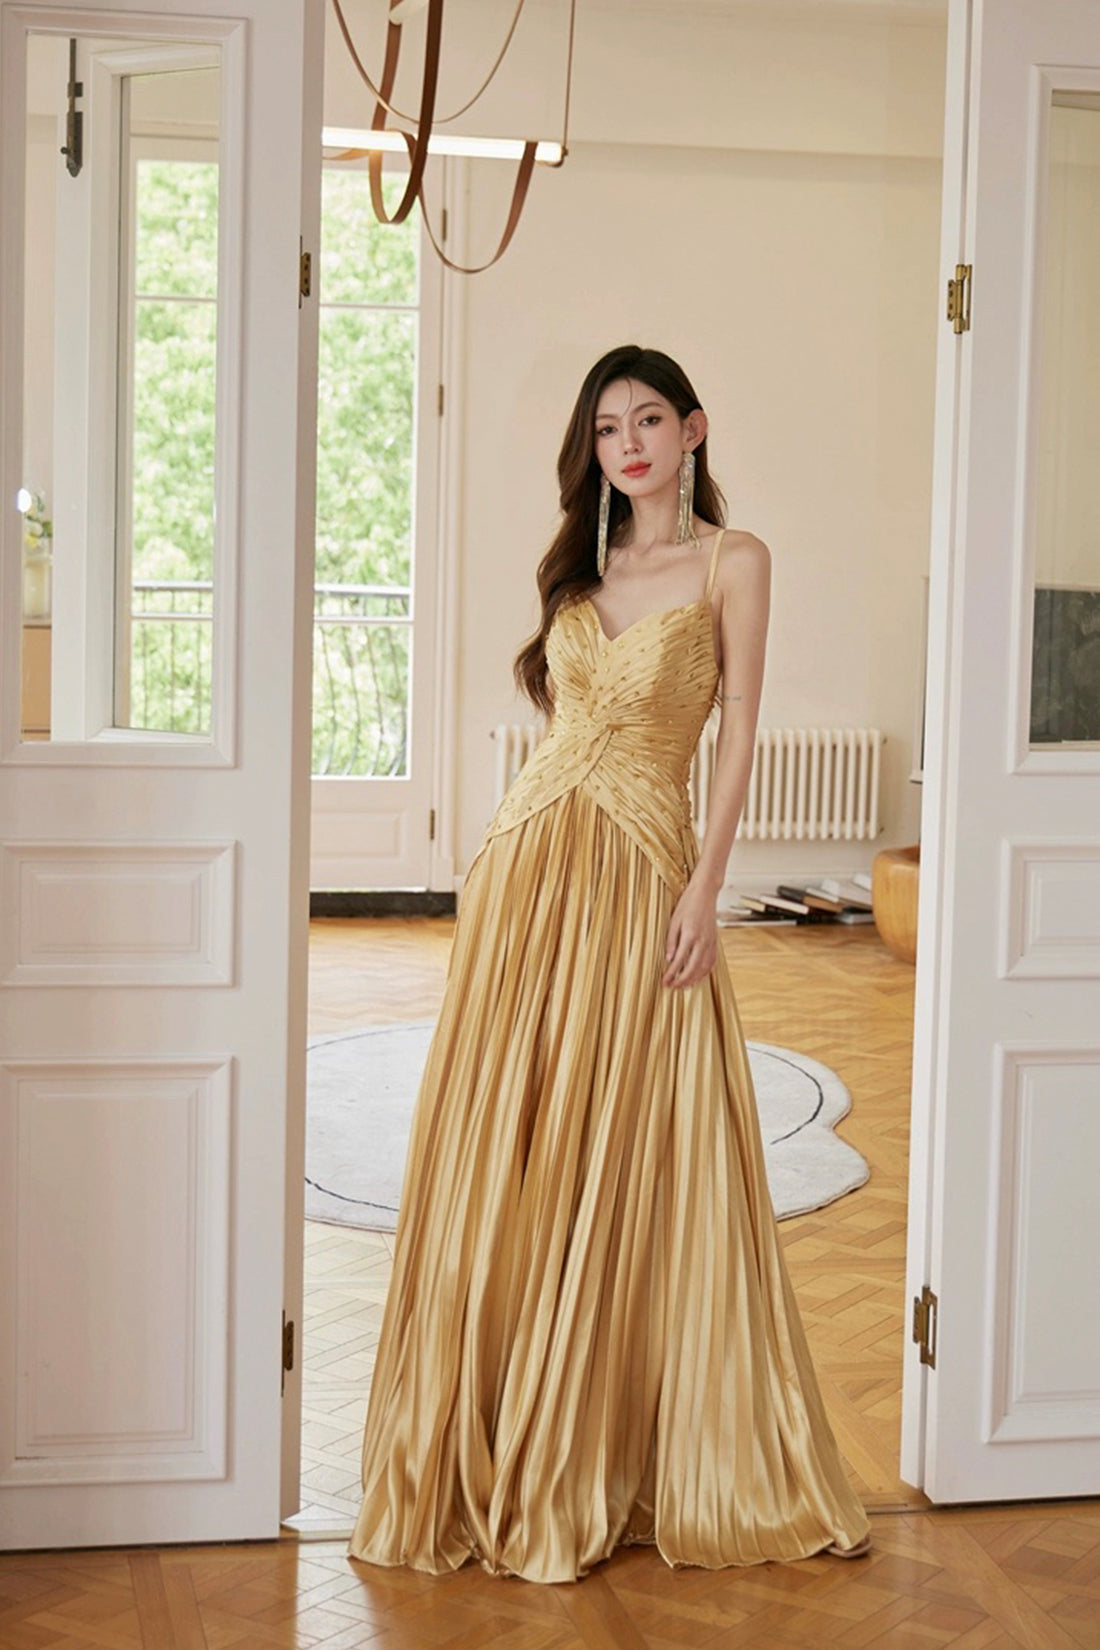 Gold Satin Long Backless Prom Dress, A-Line Spaghetti Strap Evening Party Dress